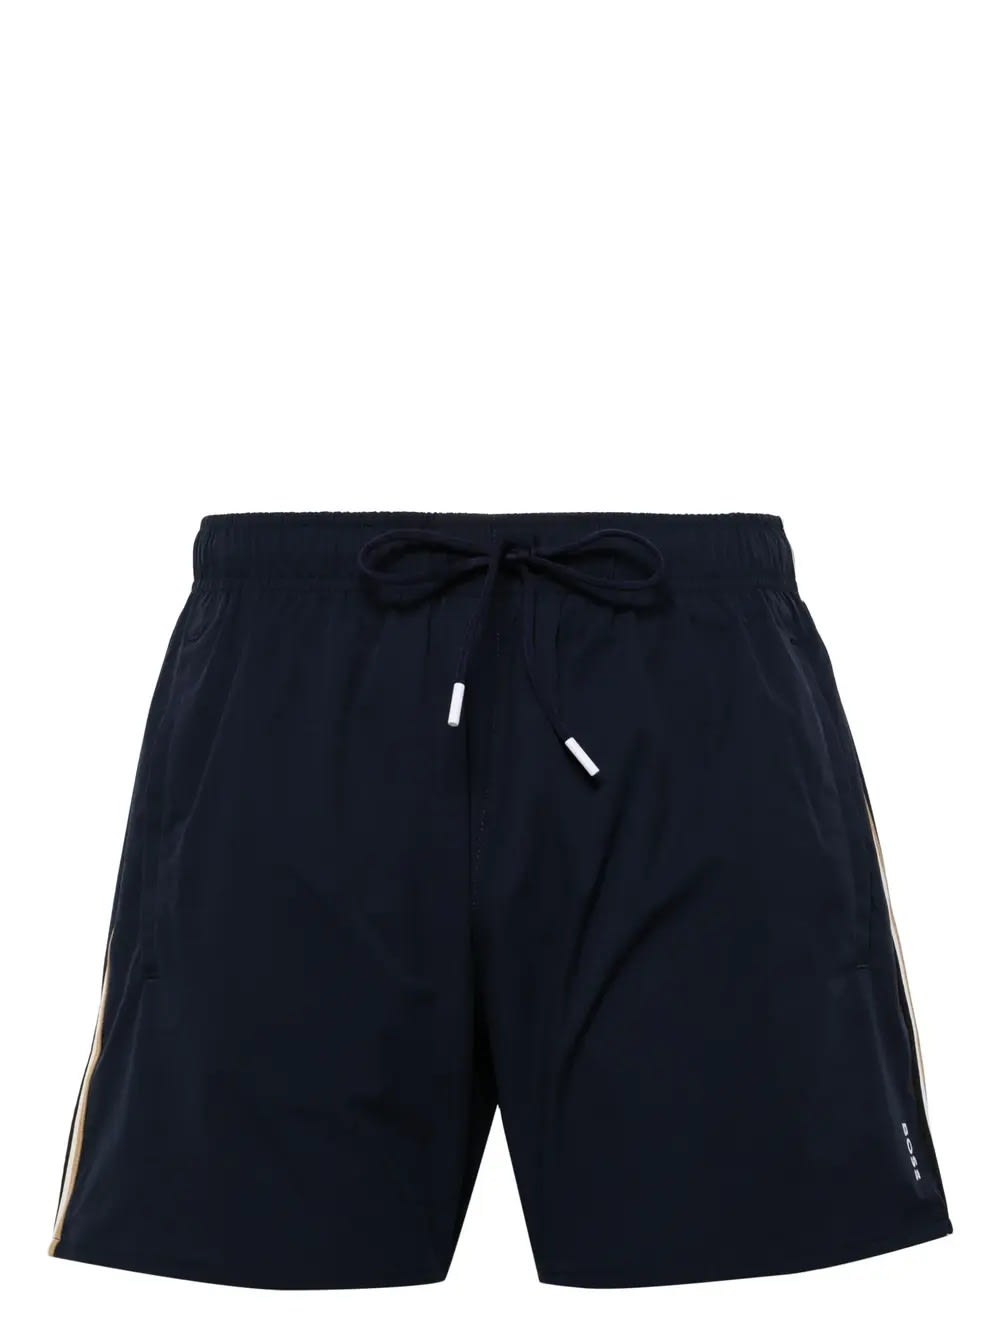 Black Beach Boxers With Typical Brand Stripes And Logo